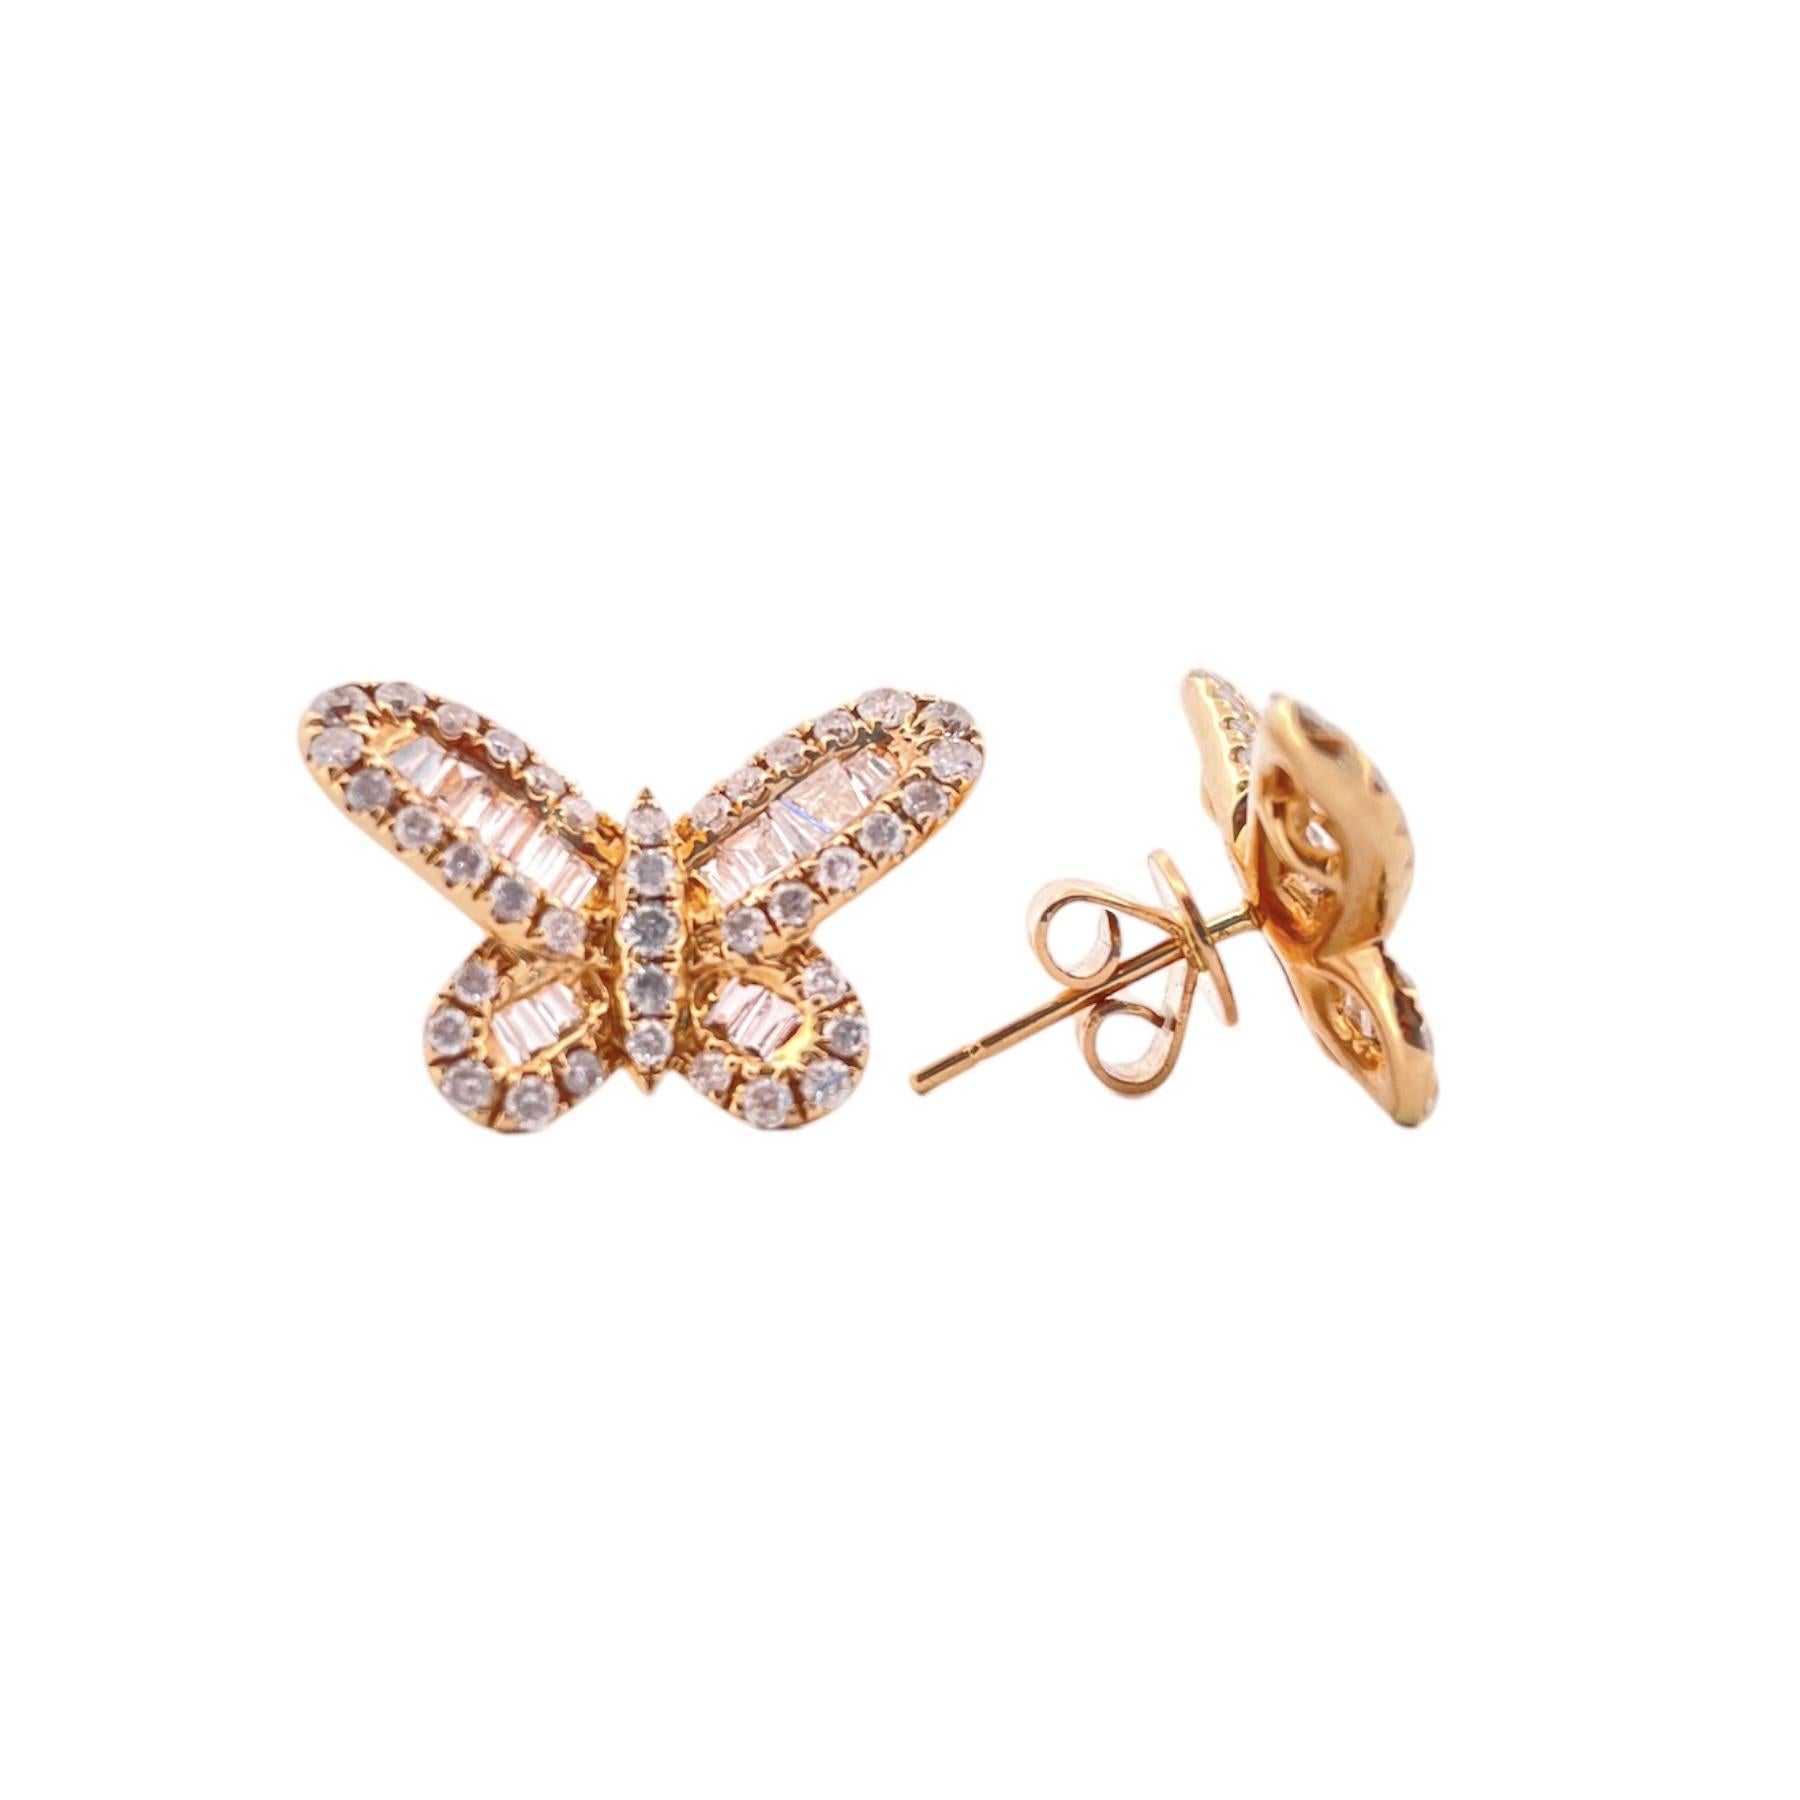 Gorgeous 14K Yellow Gold Diamond Butterfly Earring 
This piece weighs 4.9grams, 1.35carats of round brilliant.
Ready to soar through the clear sky, a butterfly is both elegant and graceful. These earrings feature fluttering wings filled with round